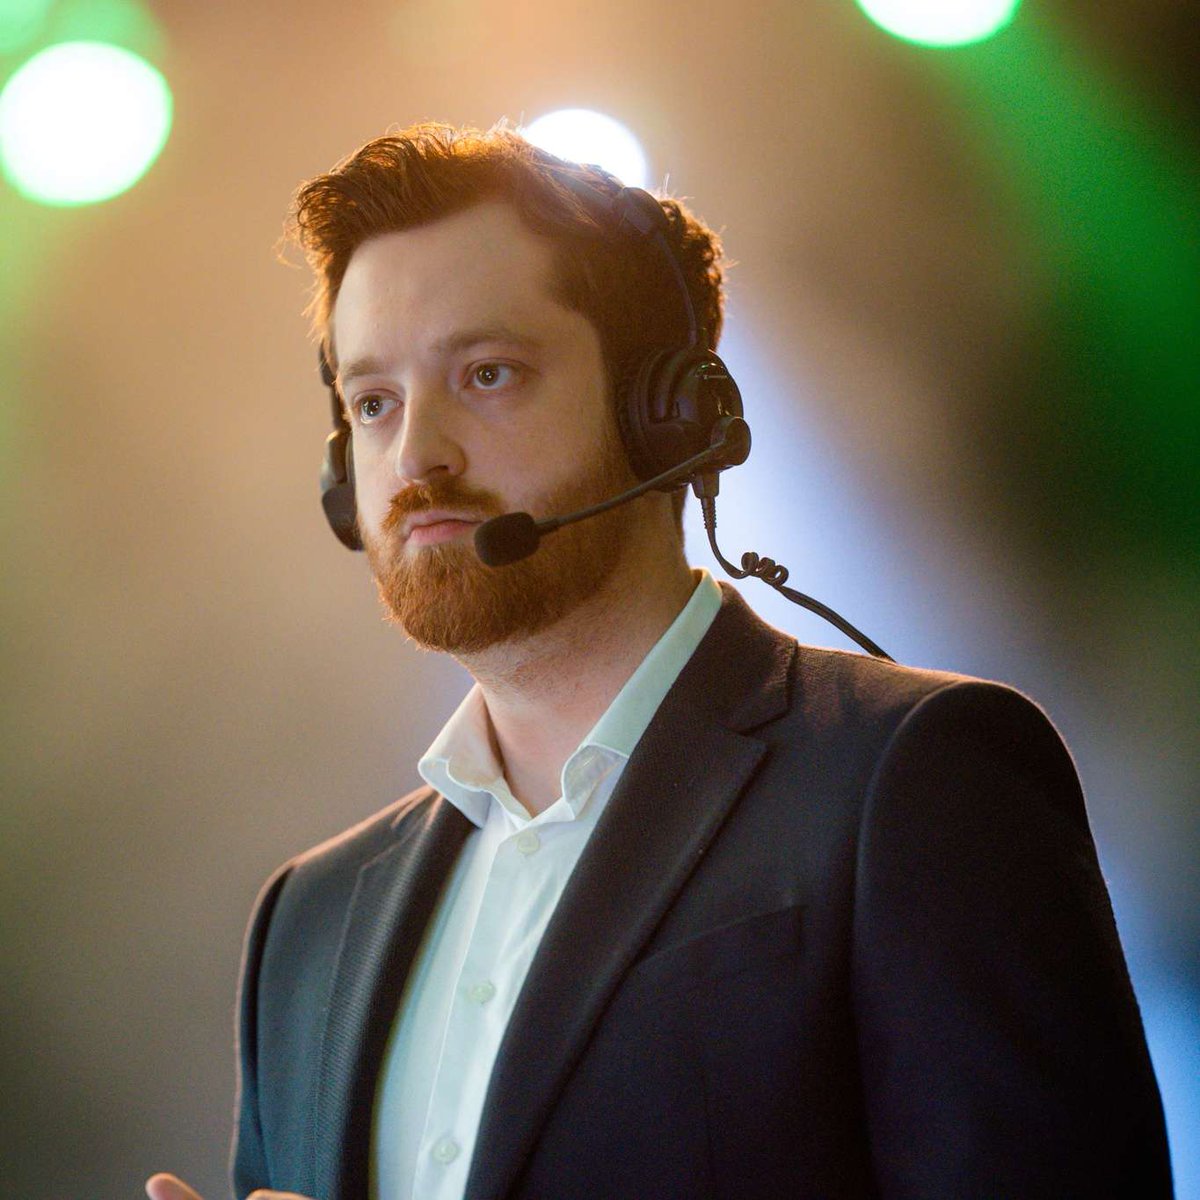 He called us noobs for years but can he back the talk? Welcome @pilskicasts as Head Coach